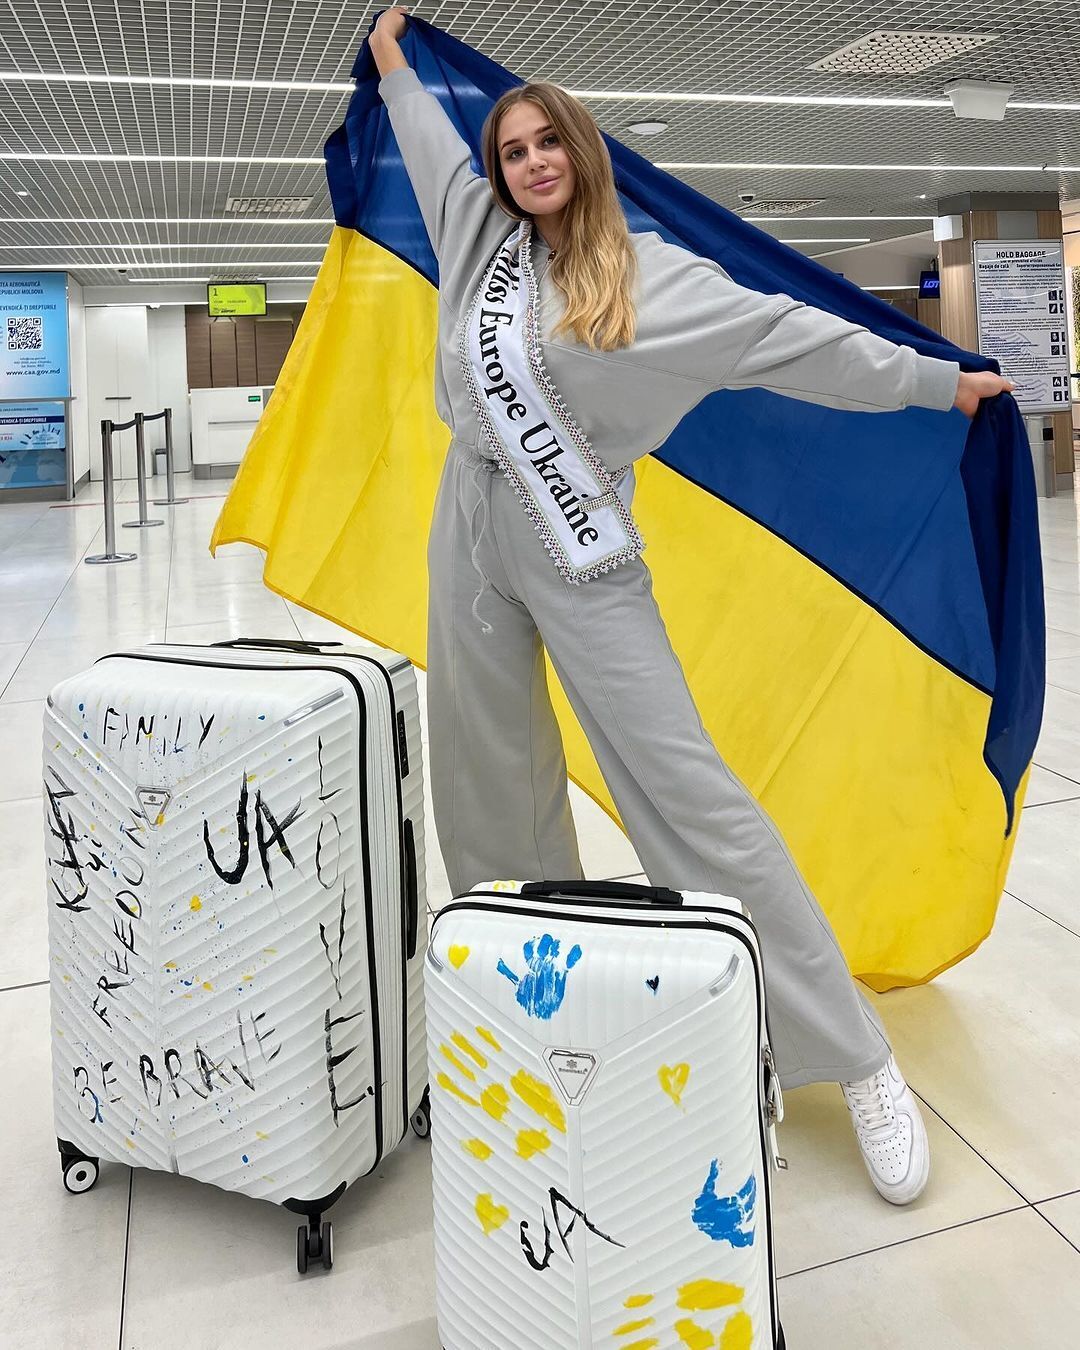 A Belarusian woman tried to justify her attack on a Ukrainian woman at Miss Europe, but only confirmed that Milena Melnychuk did everything right